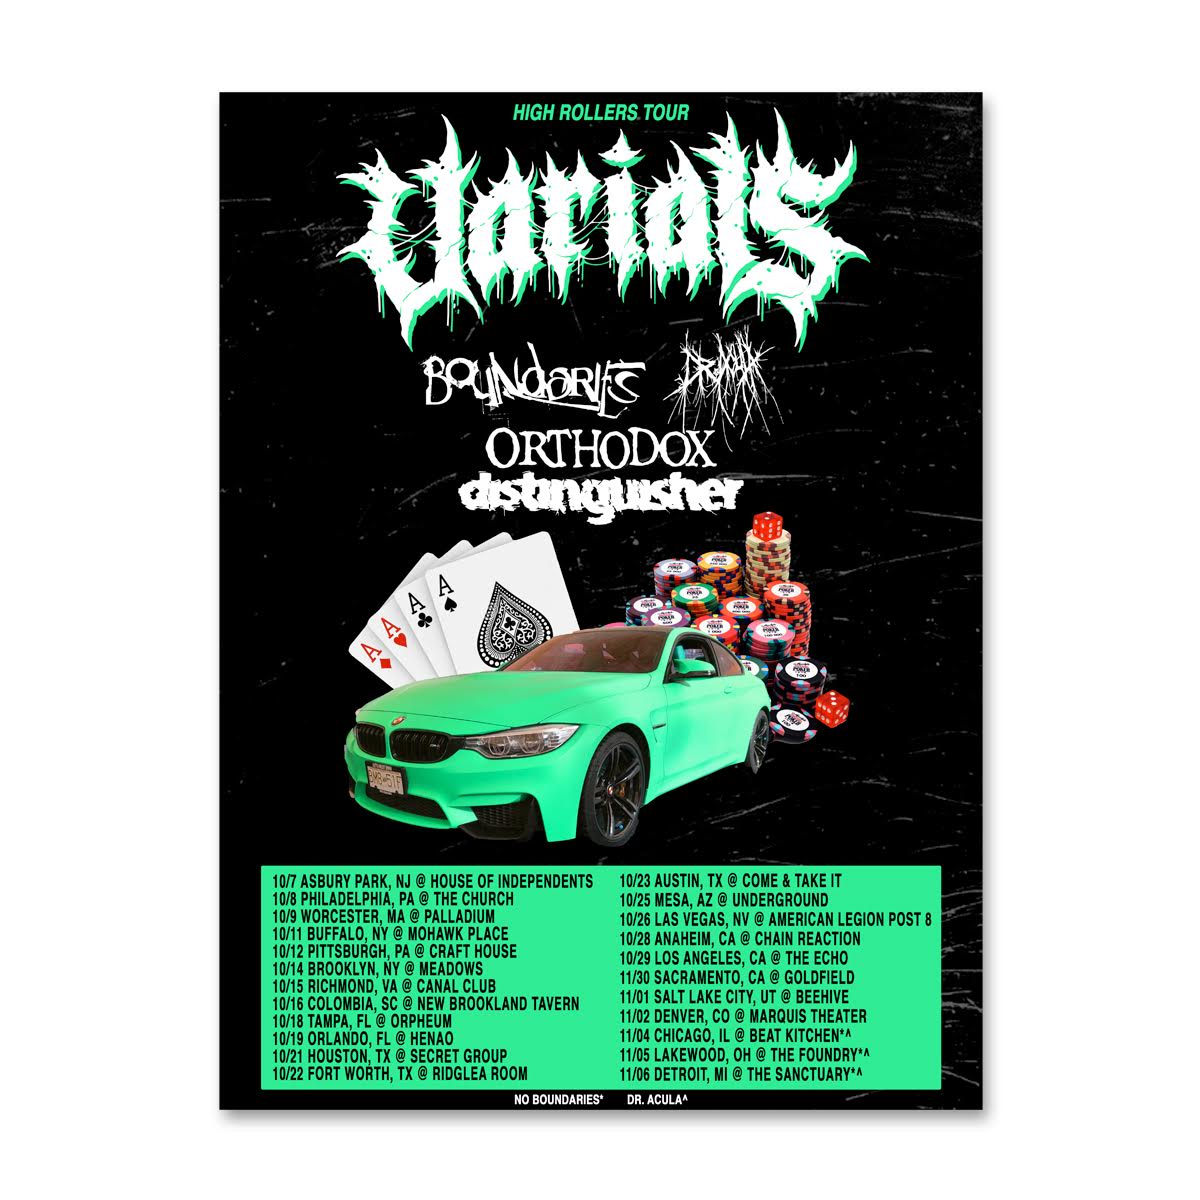 HIGH ROLLERS TOUR POSTER